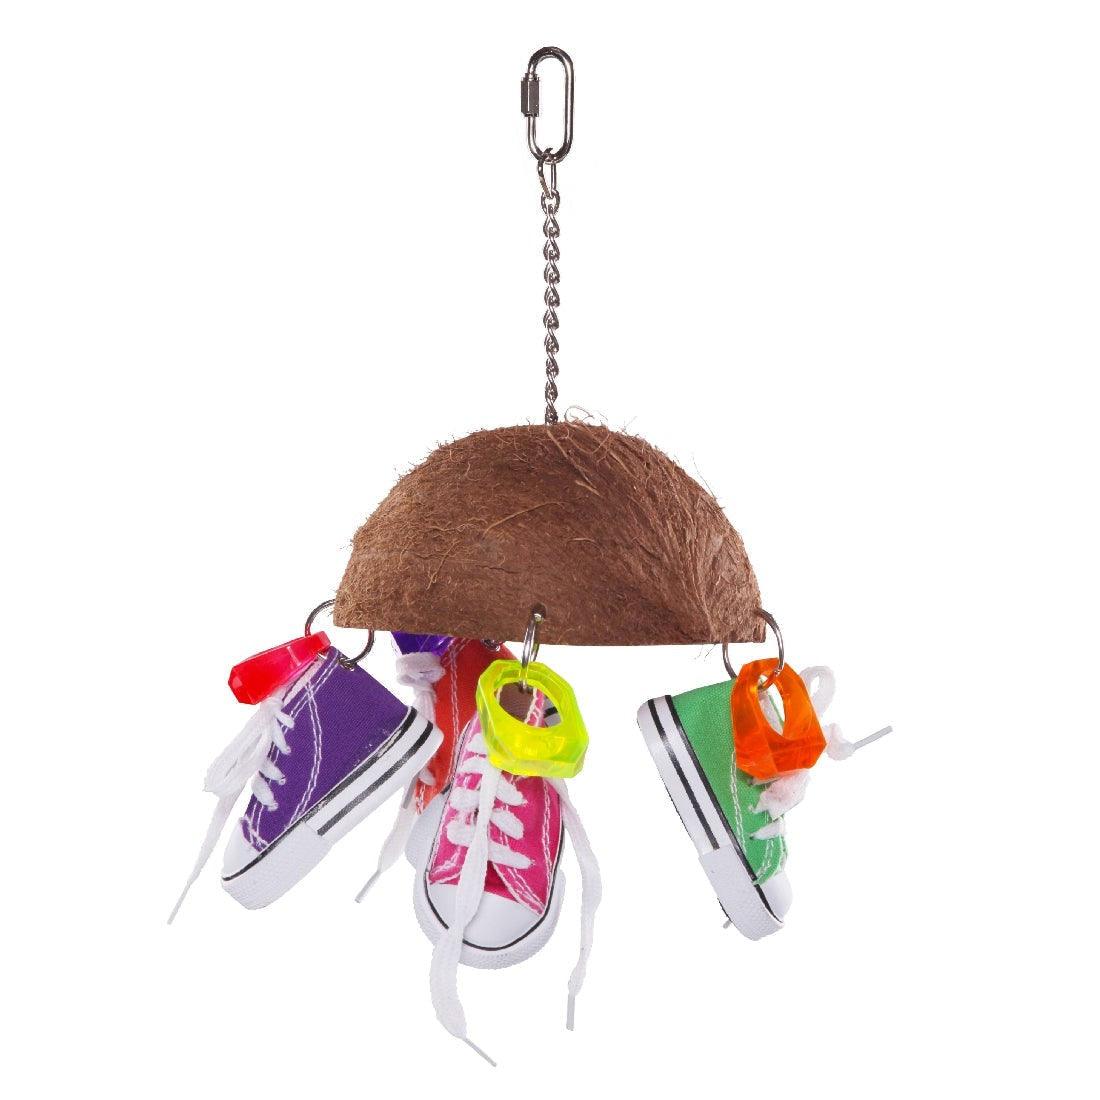 Colorful hanging coconut bird toy with miniature sneakers and beads.